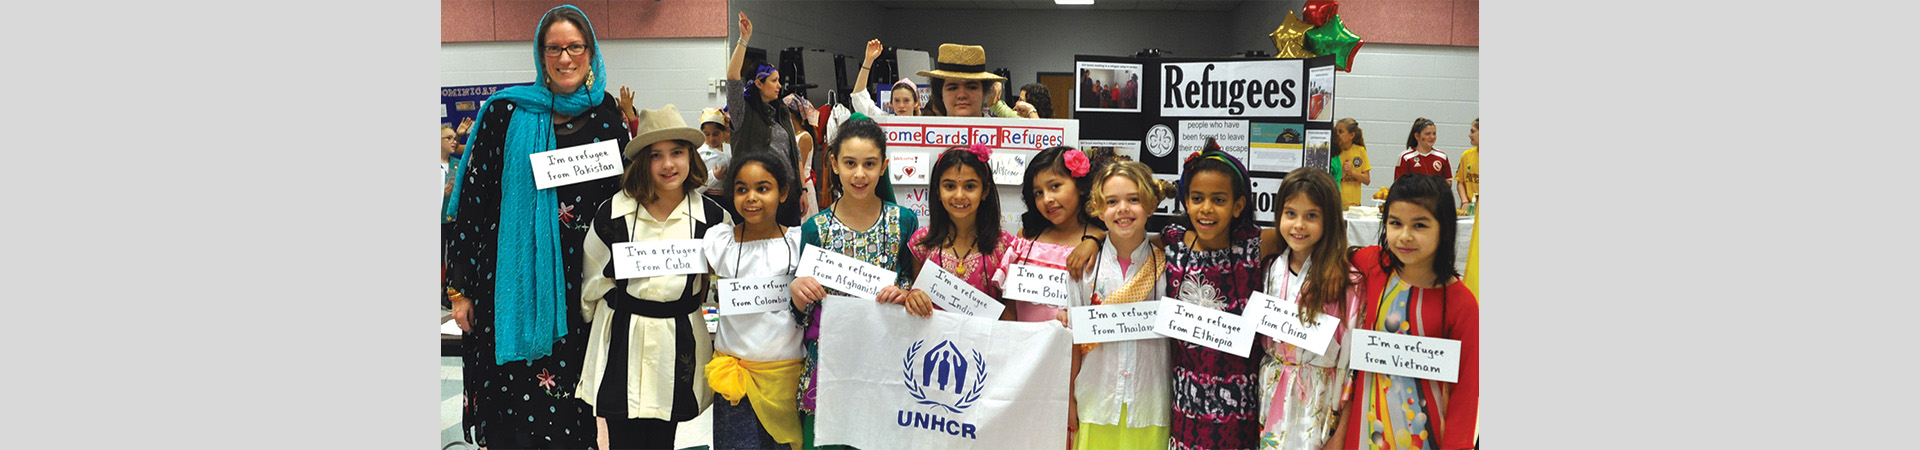  Troop 3173 holds UNHCR flag at World Thinking Day event. 